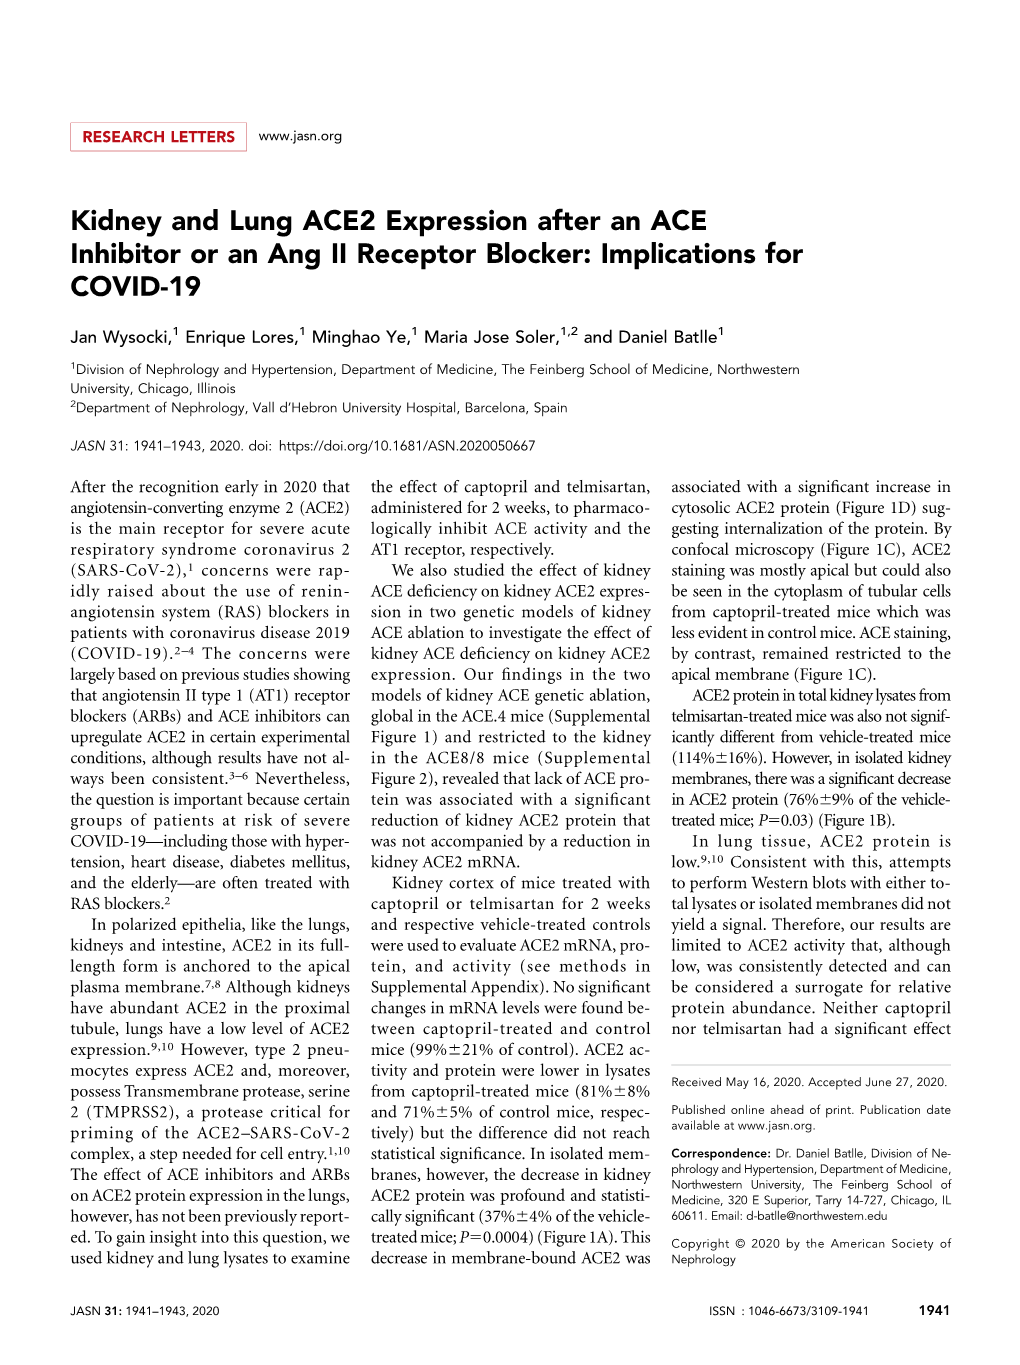 Kidney and Lung ACE2 Expression After an ACE Inhibitor Or an Ang II Receptor Blocker: Implications for COVID-19